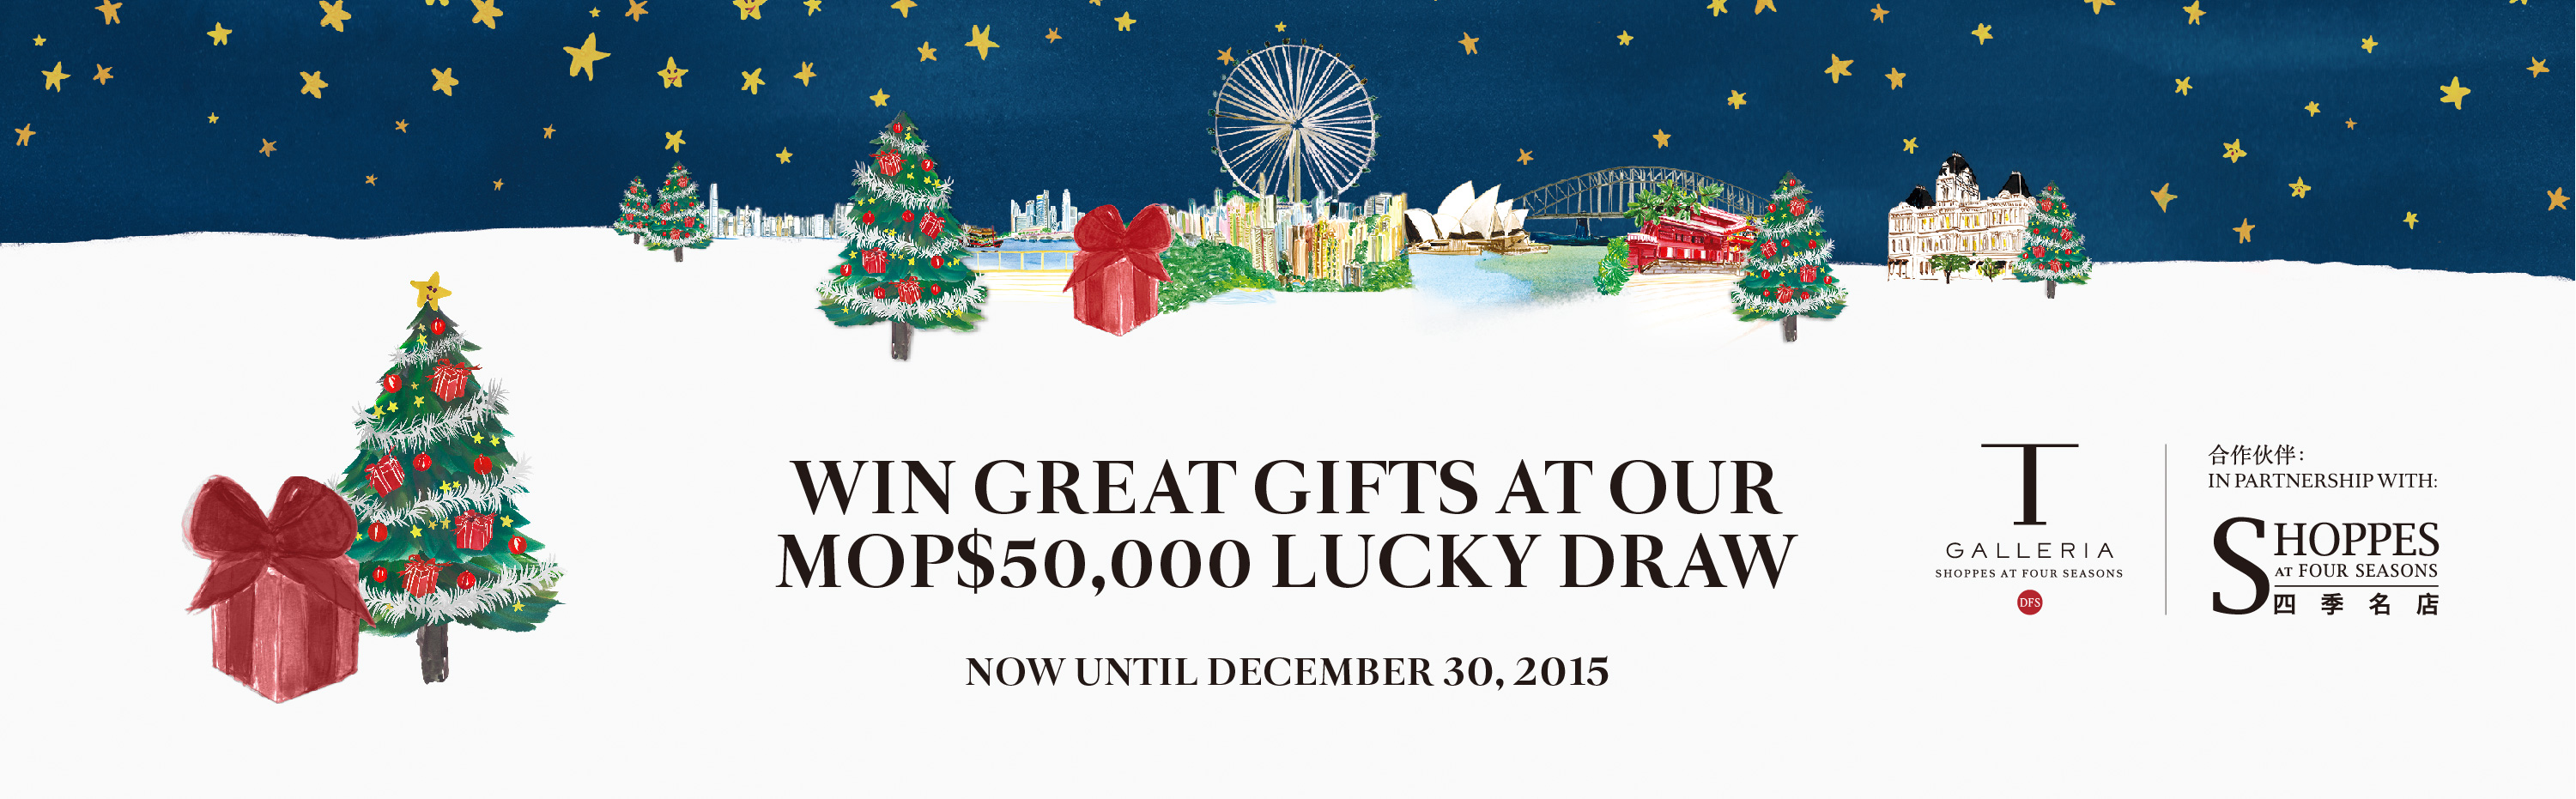 WIN GREAT GIFTS AT OUR MOP$50,000 LUCKY DRAW*